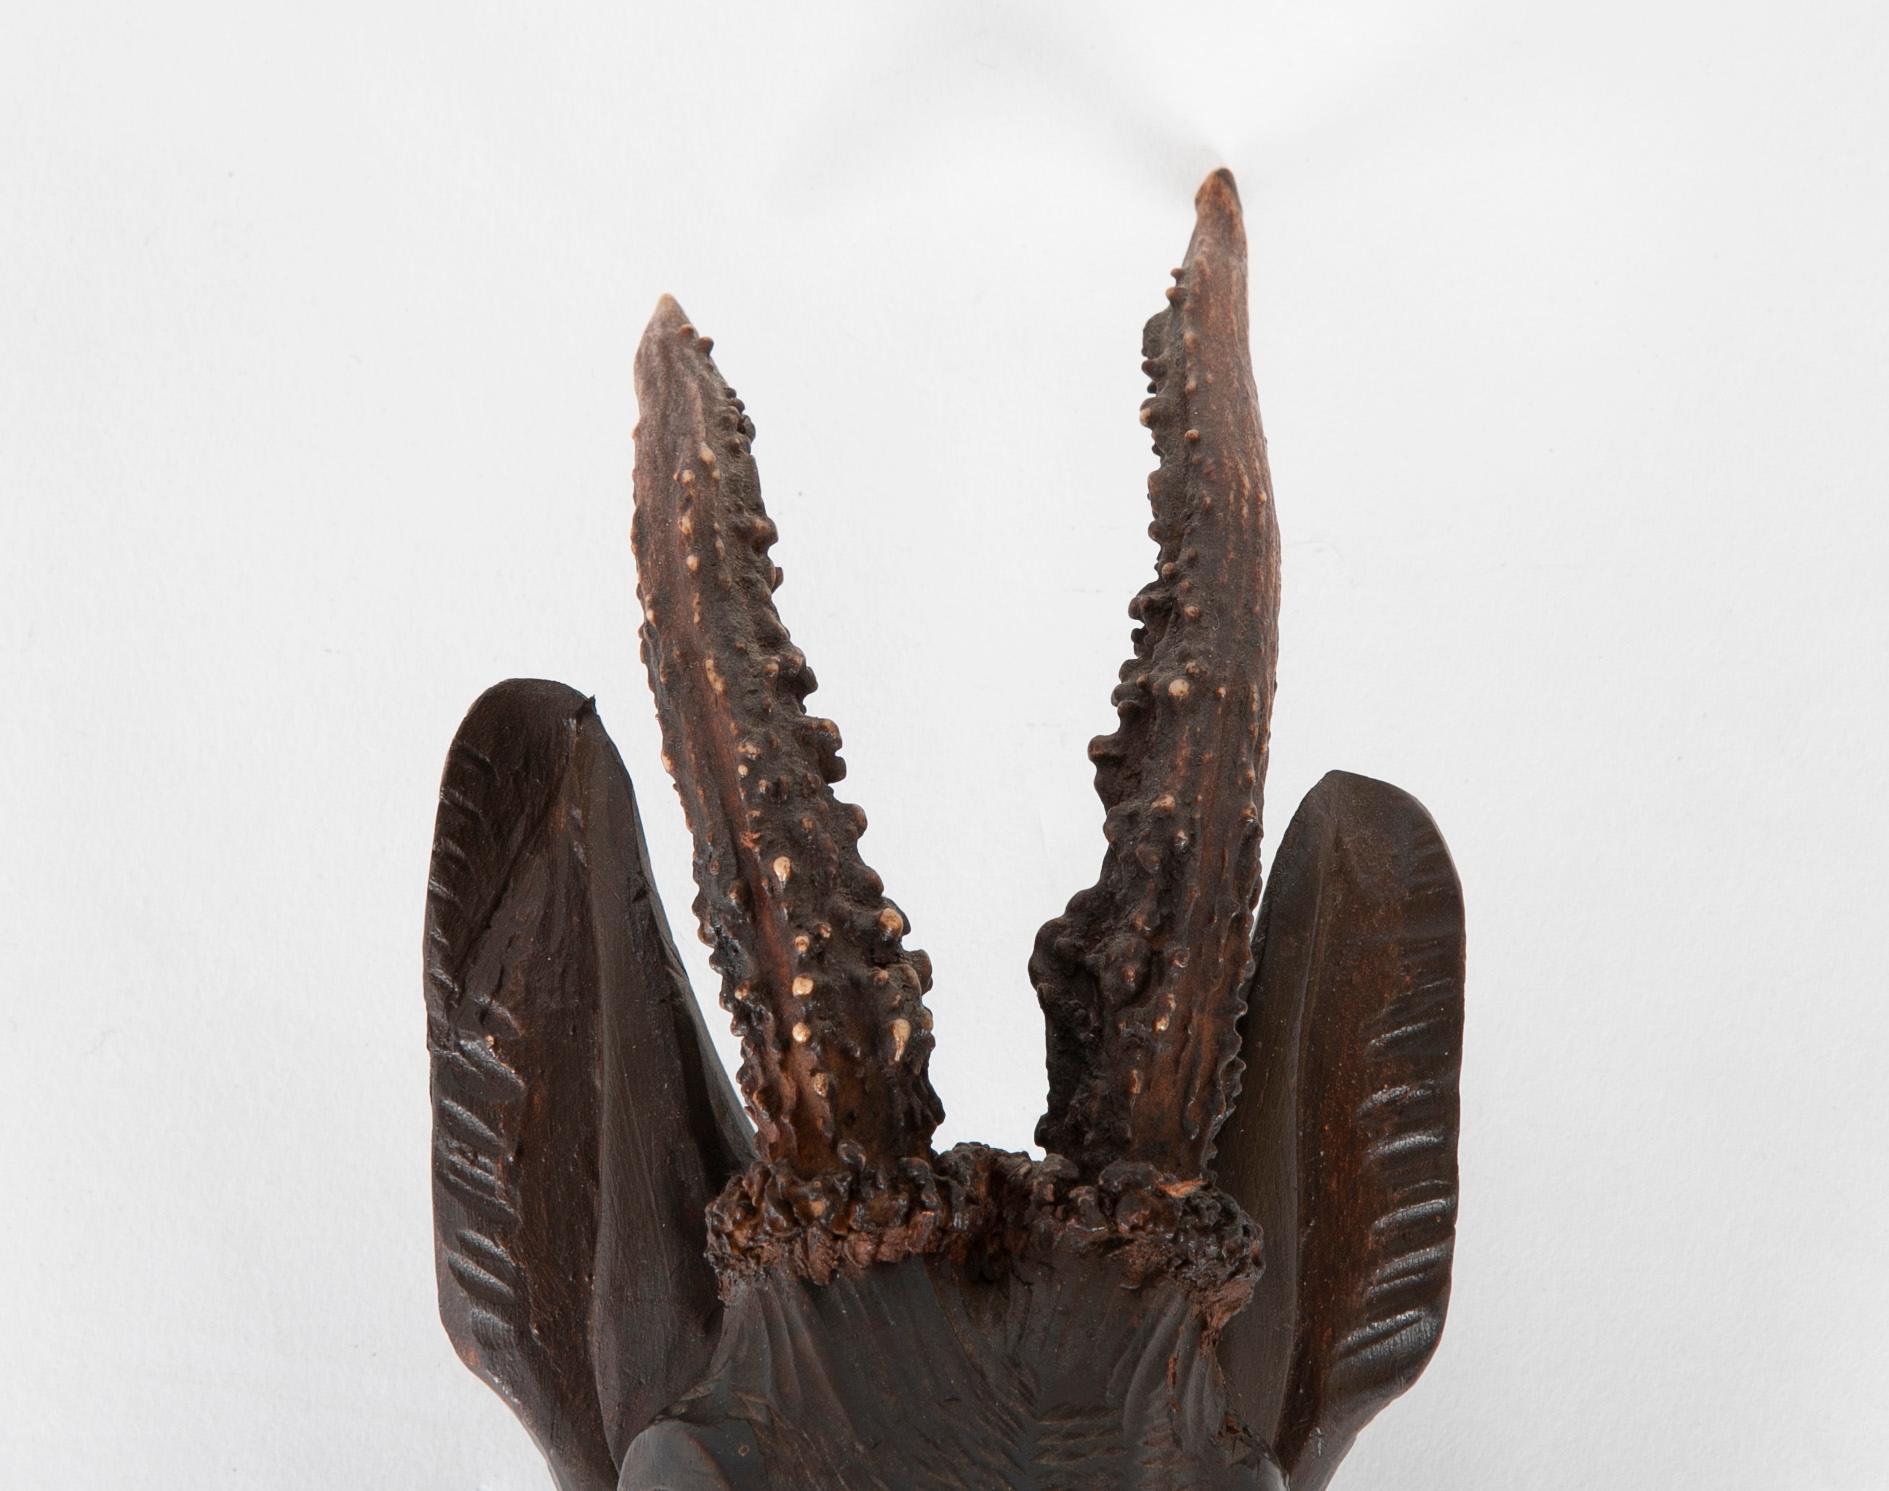 20th Century Black Forest Carved Wood Stag Head Trophy with Antlers